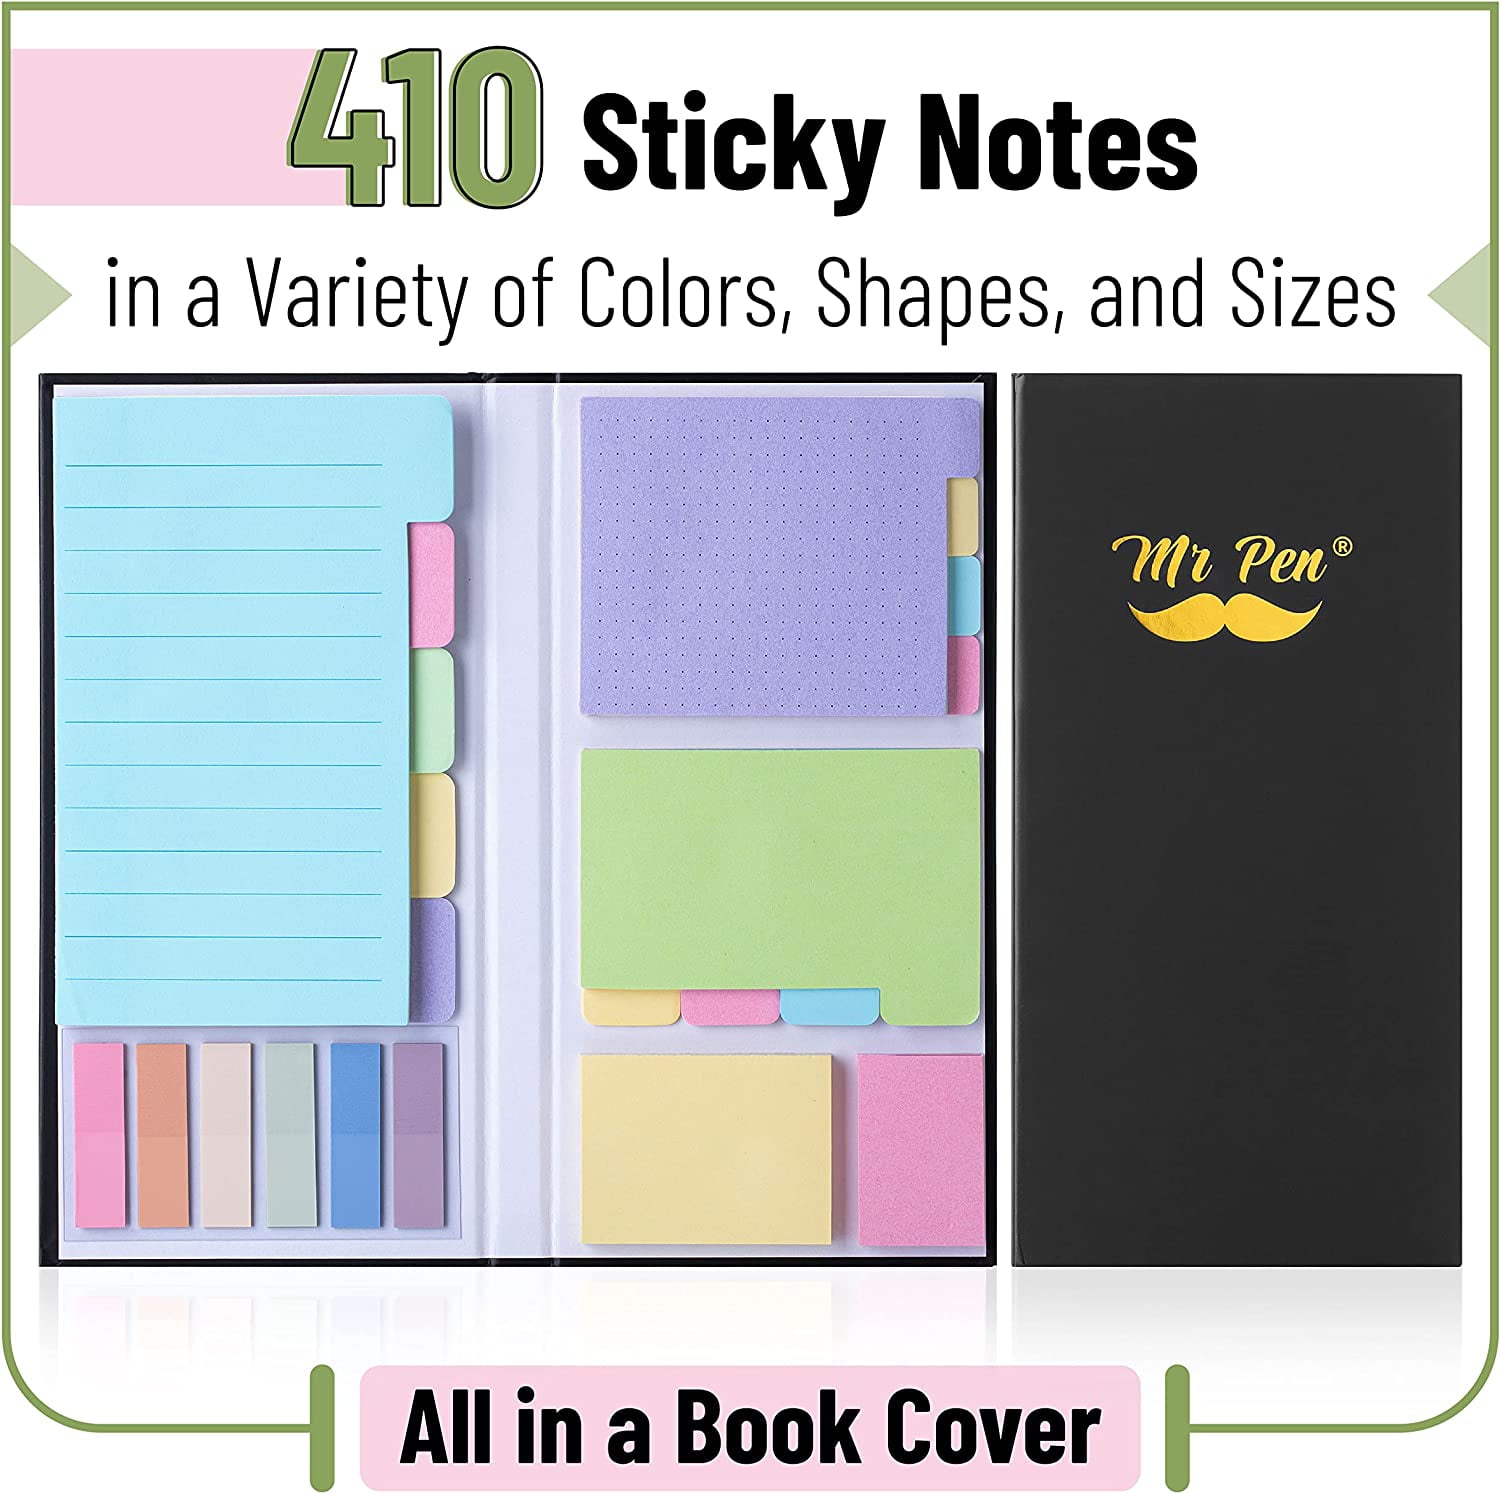 Explore Sticky Note Varieties: Sizes, Colors & Types